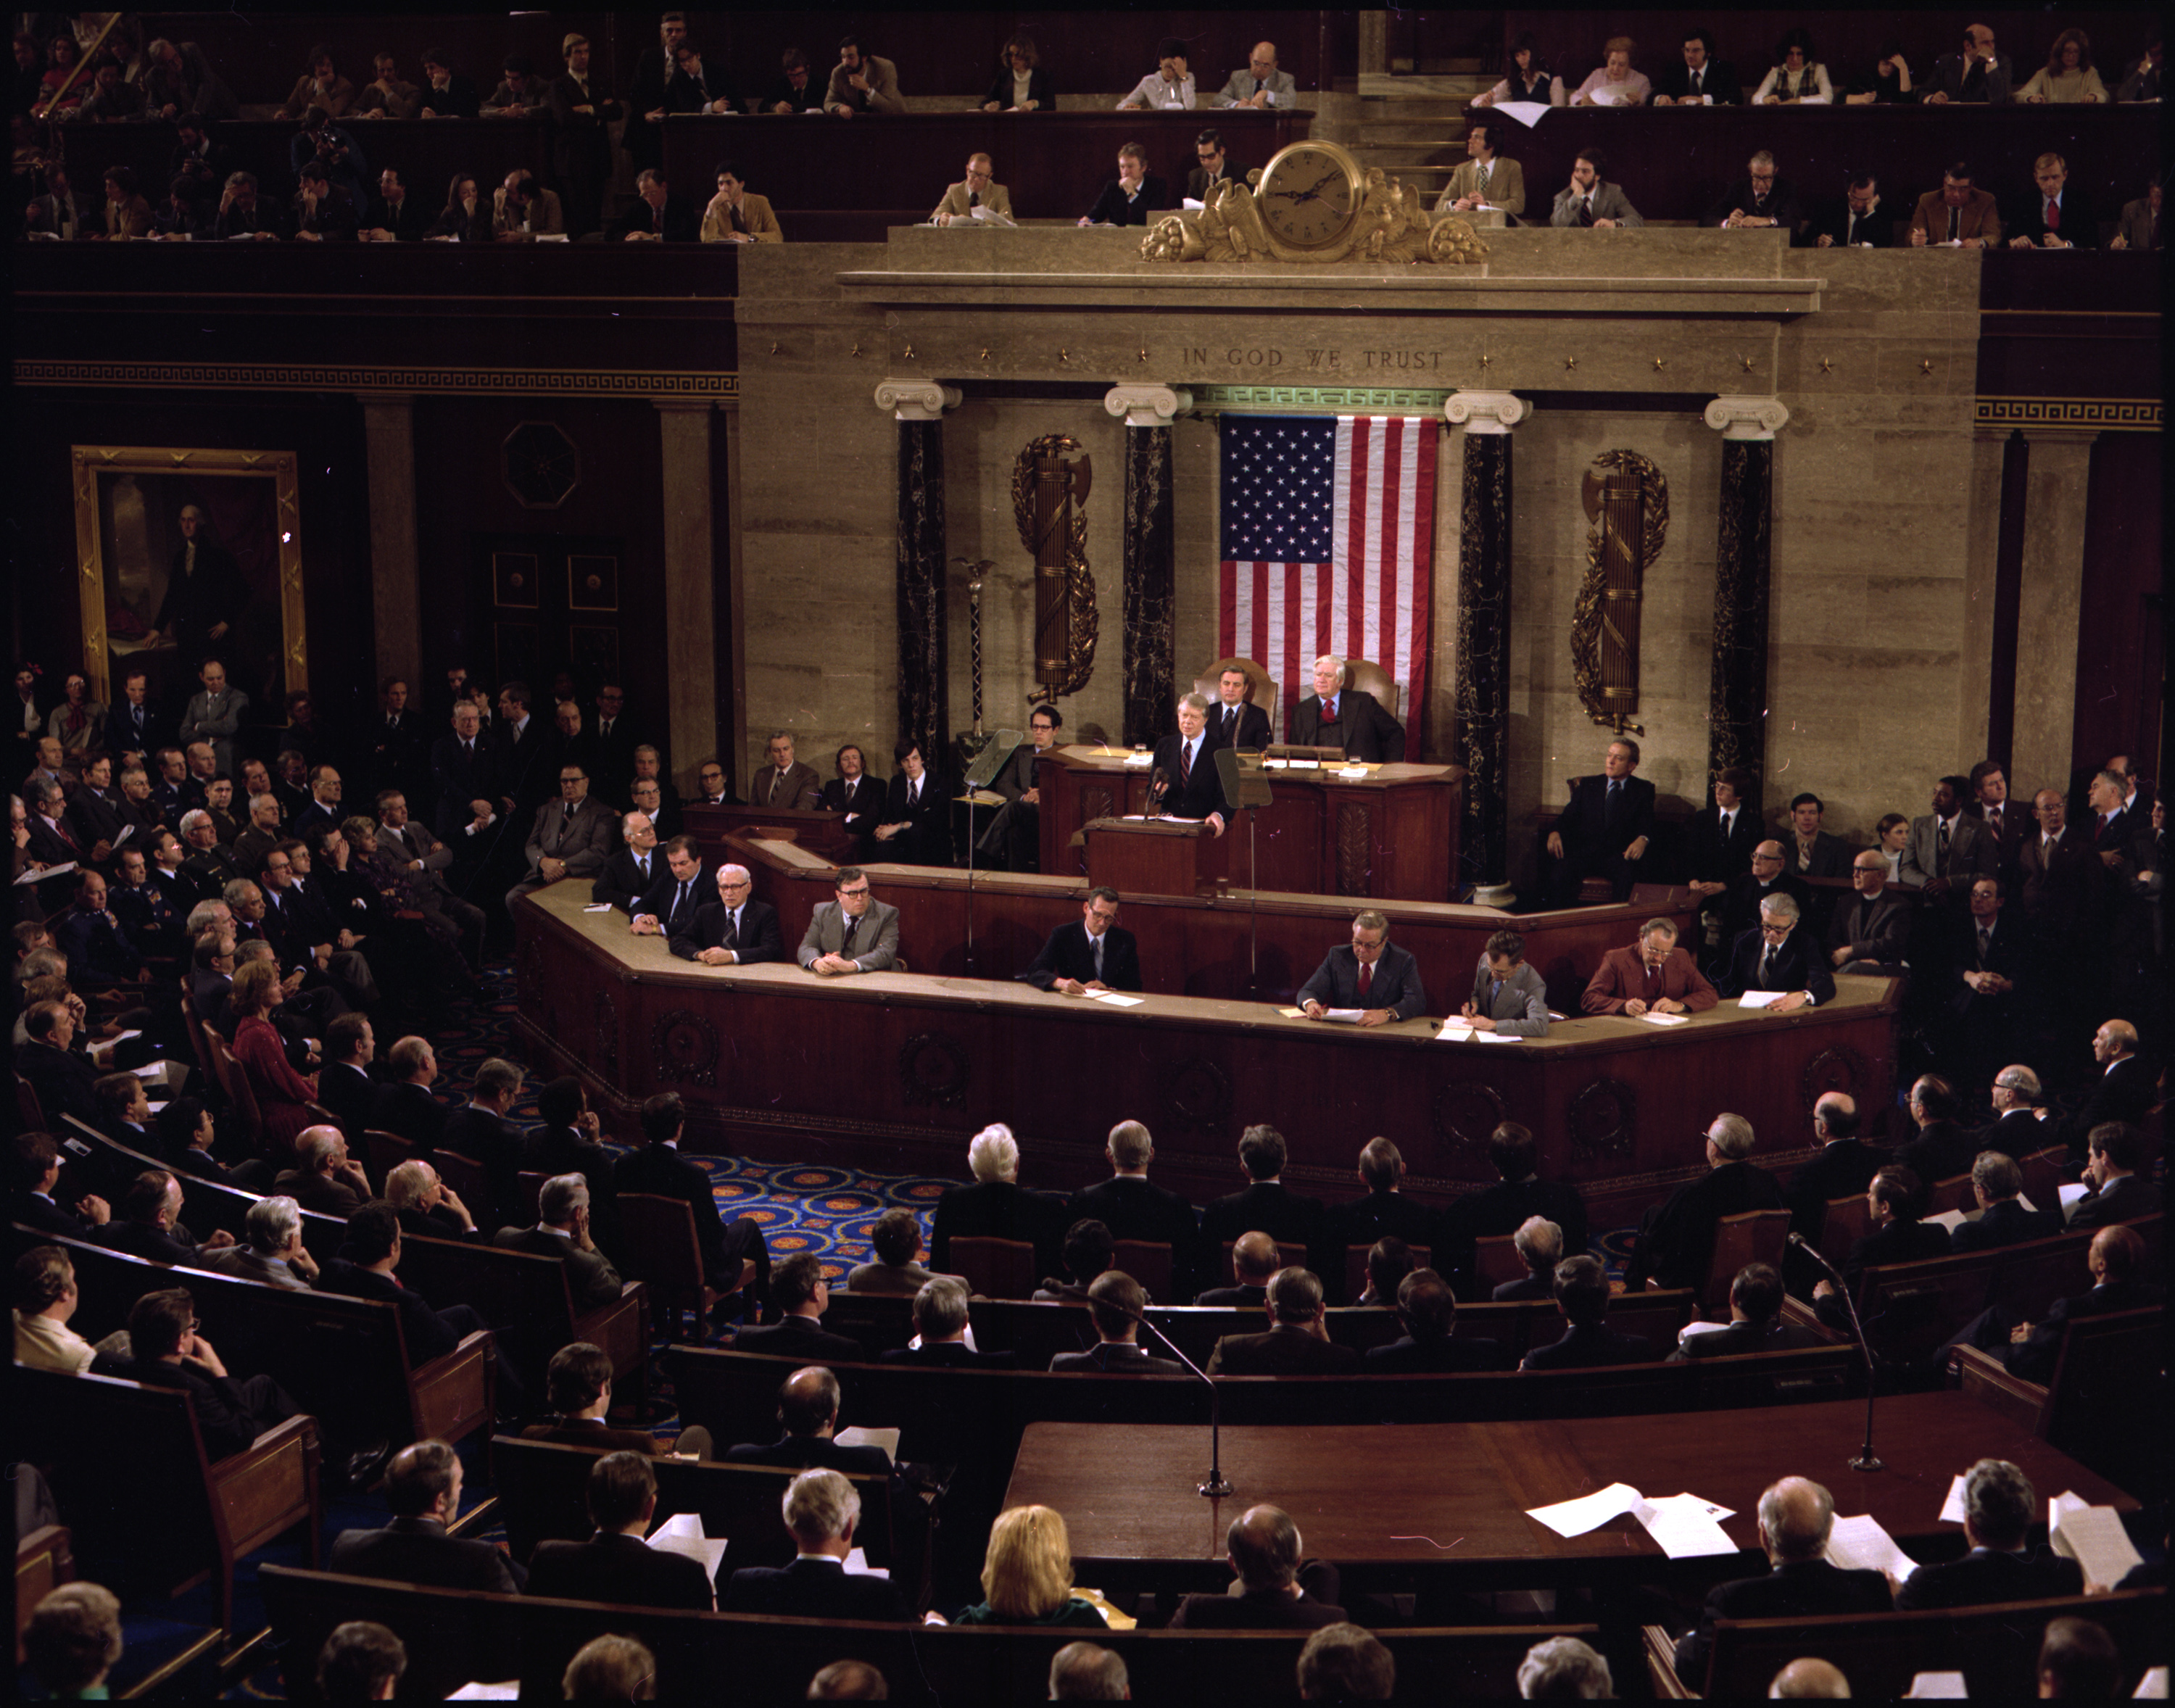 Former US President Jimmy Carter stands at the speaker’s podium in front of an American flag to deliver his 1978 State of the Union address to both chambers of Congress.